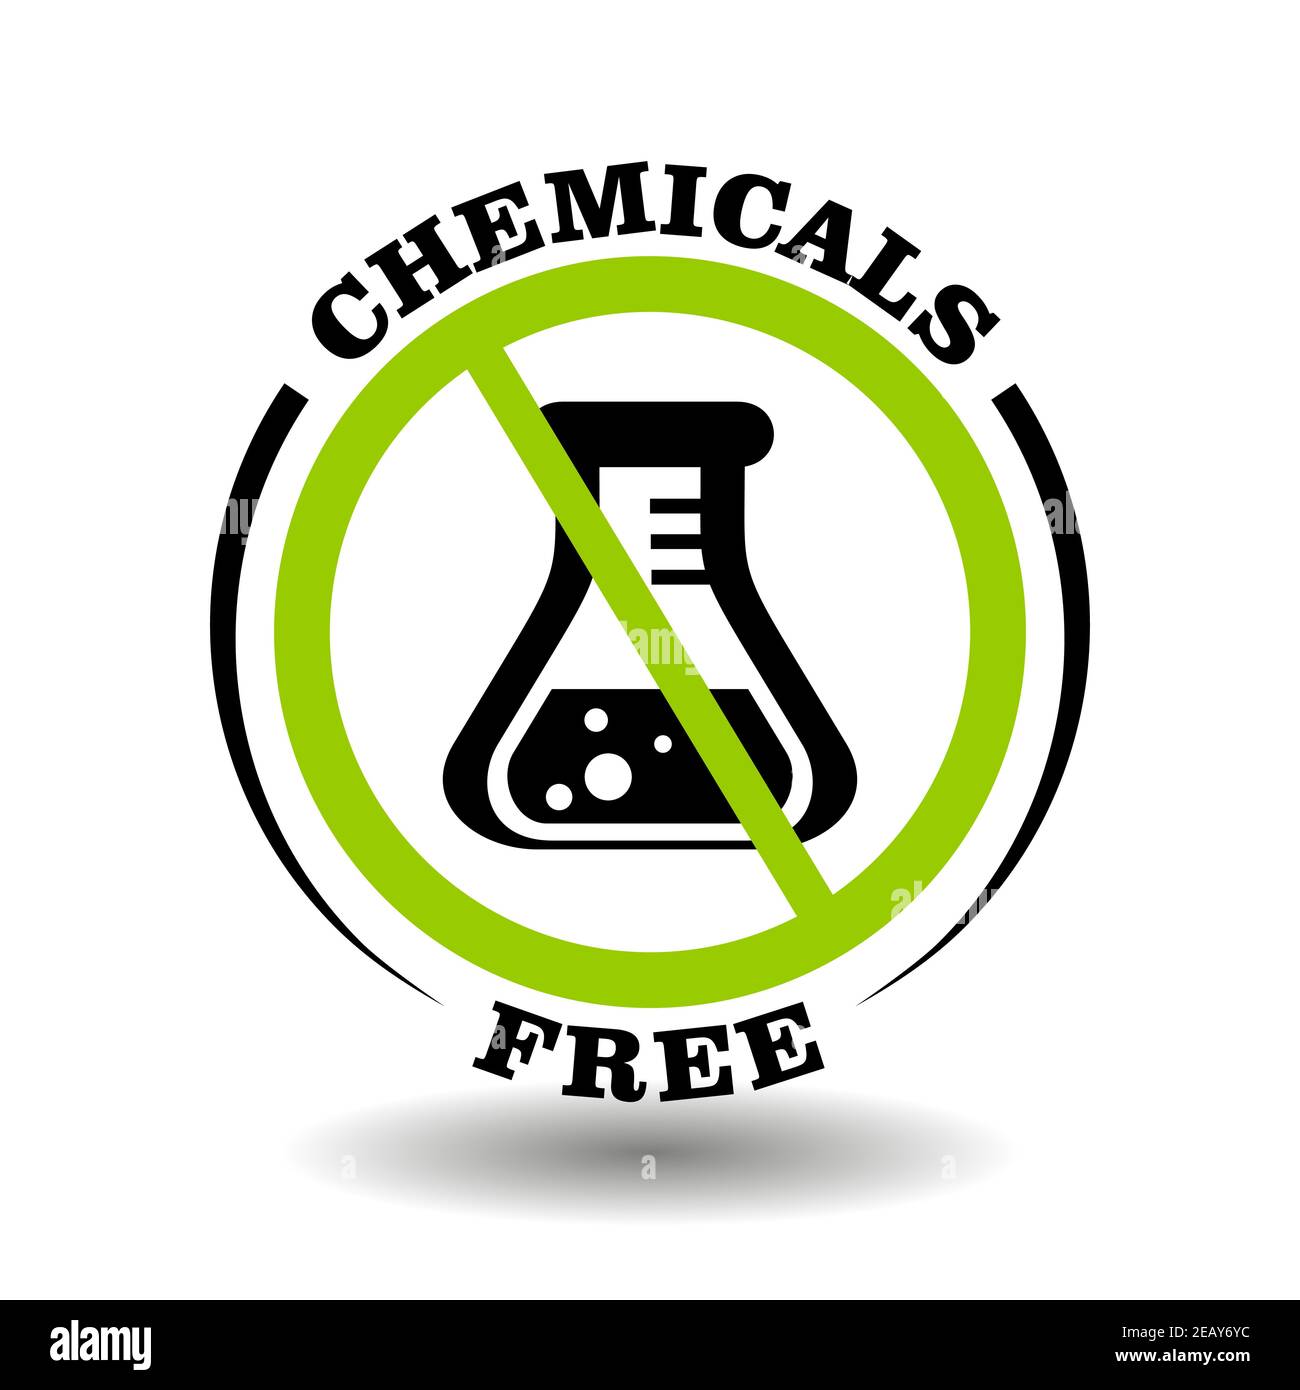 https://c8.alamy.com/comp/2EAY6YC/chemicals-free-vector-stamp-for-product-packaging-symbol-round-prohibited-sign-with-chemical-flask-icon-isolated-on-white-2EAY6YC.jpg